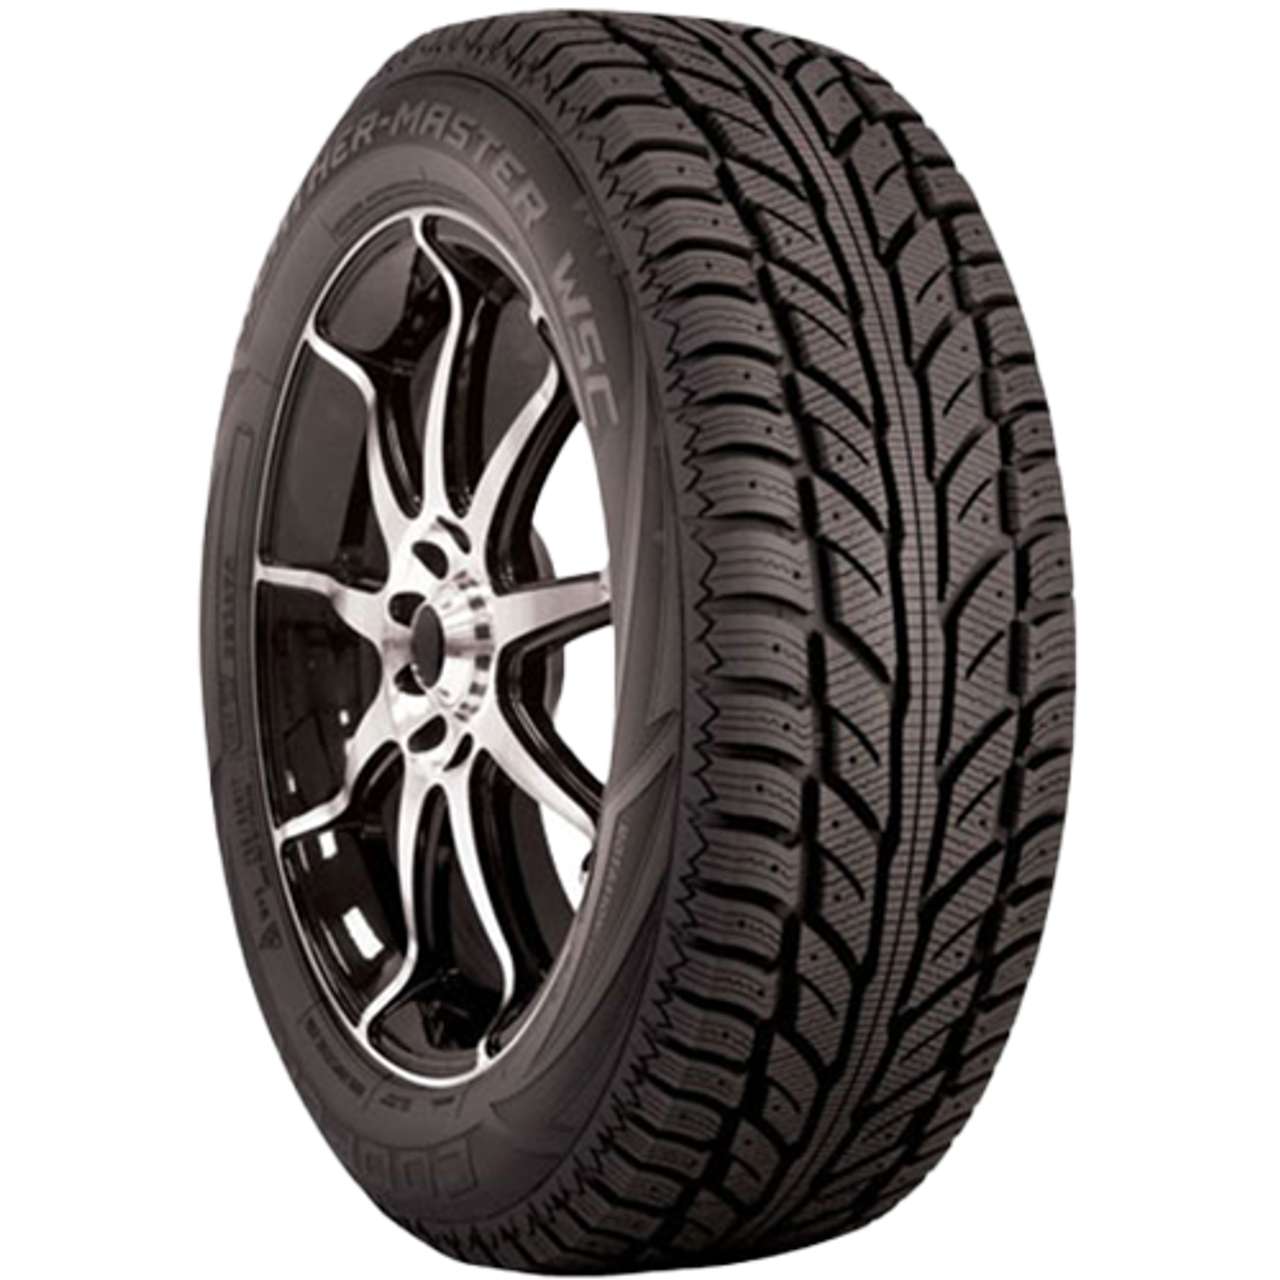 COOPER WEATHERMASTER WSC 215/60R17 96T STUDDABLE BSW